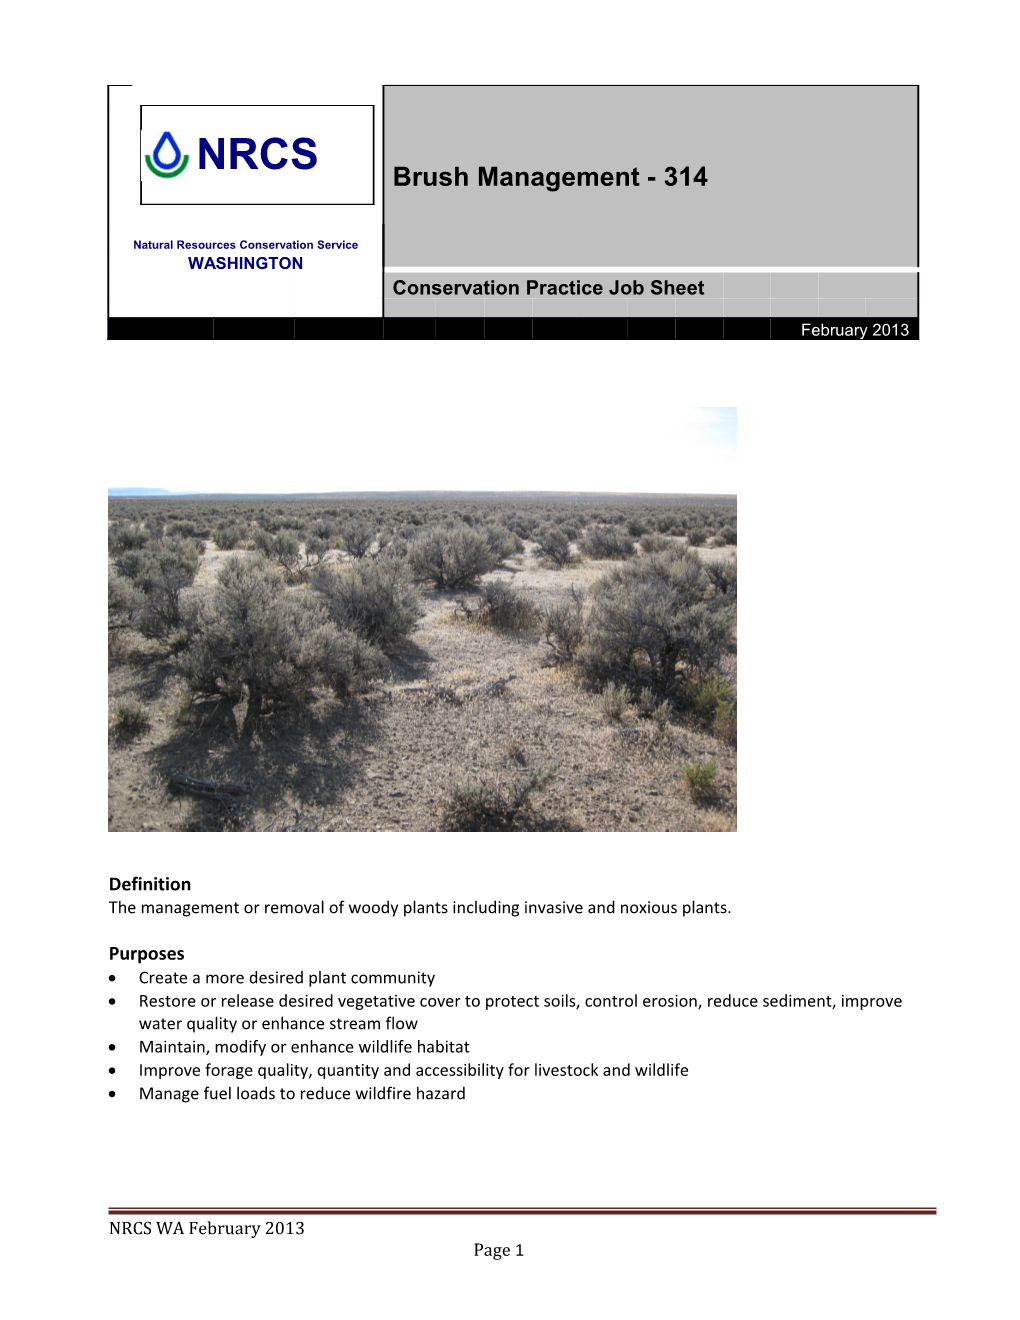 The Management Or Removal of Woody Plants Including Invasive and Noxious Plants